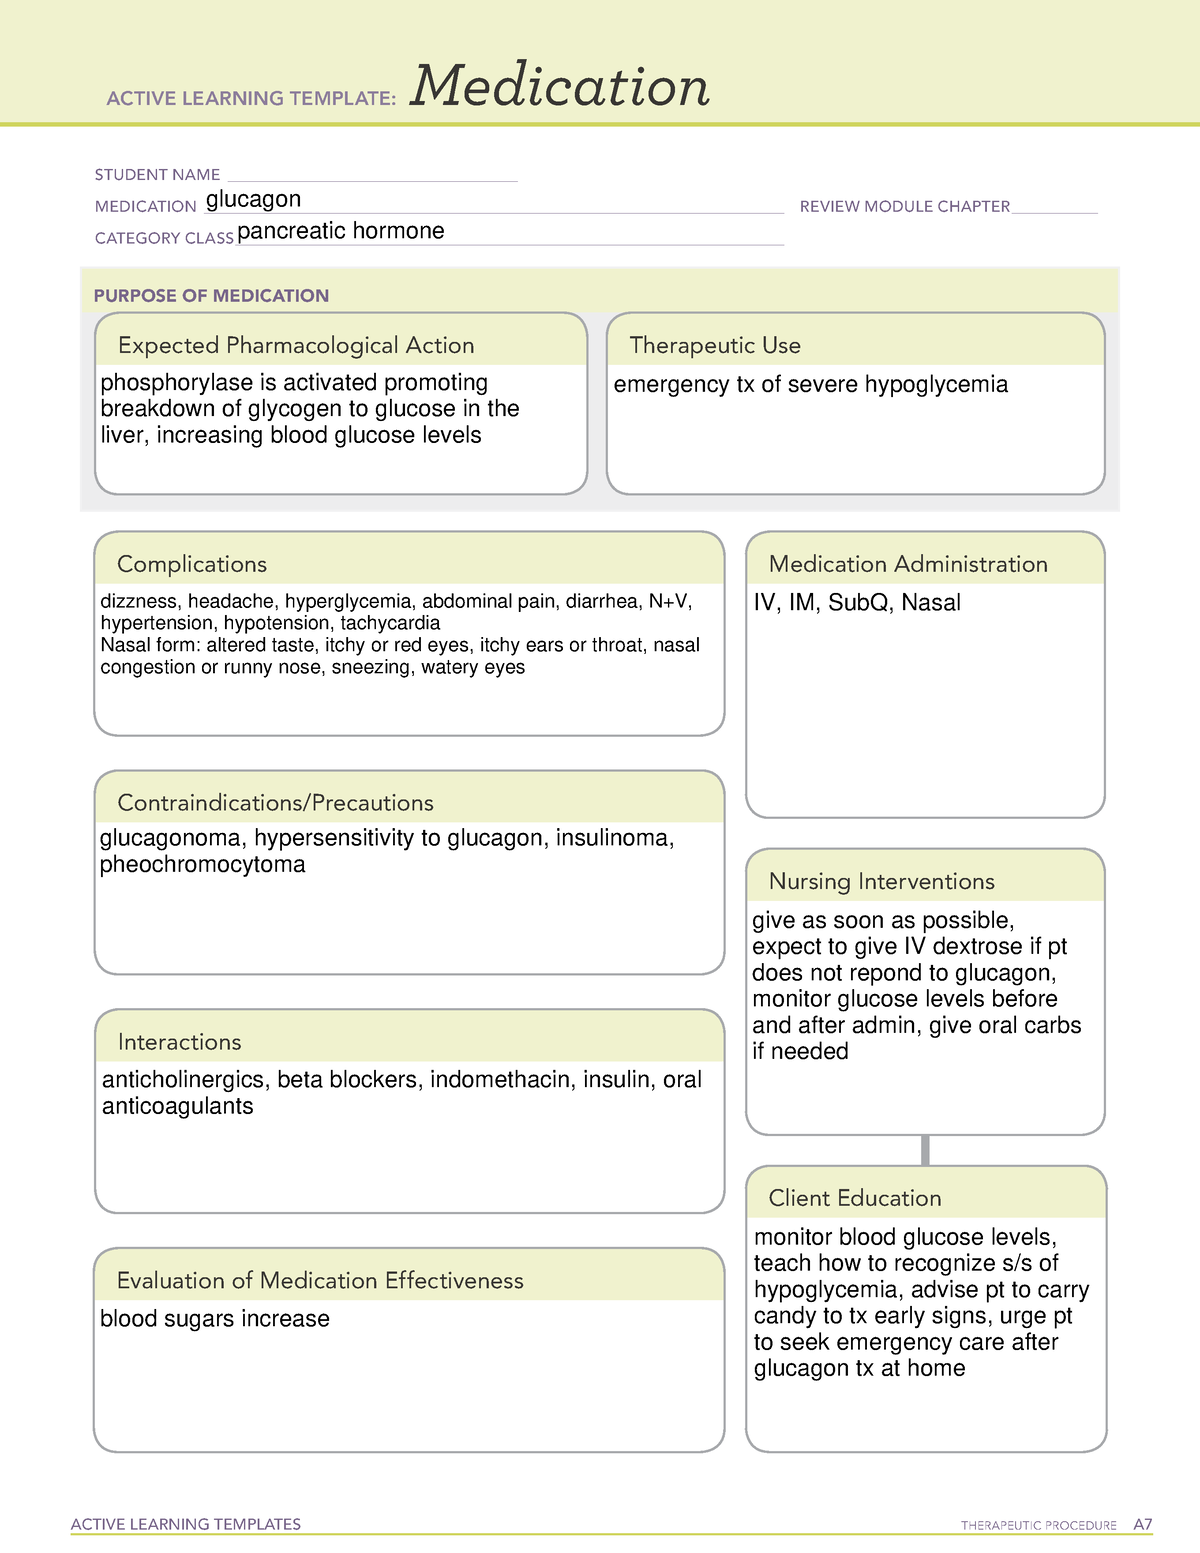 ATI medication template ACTIVE LEARNING TEMPLATES THERAPEUTIC